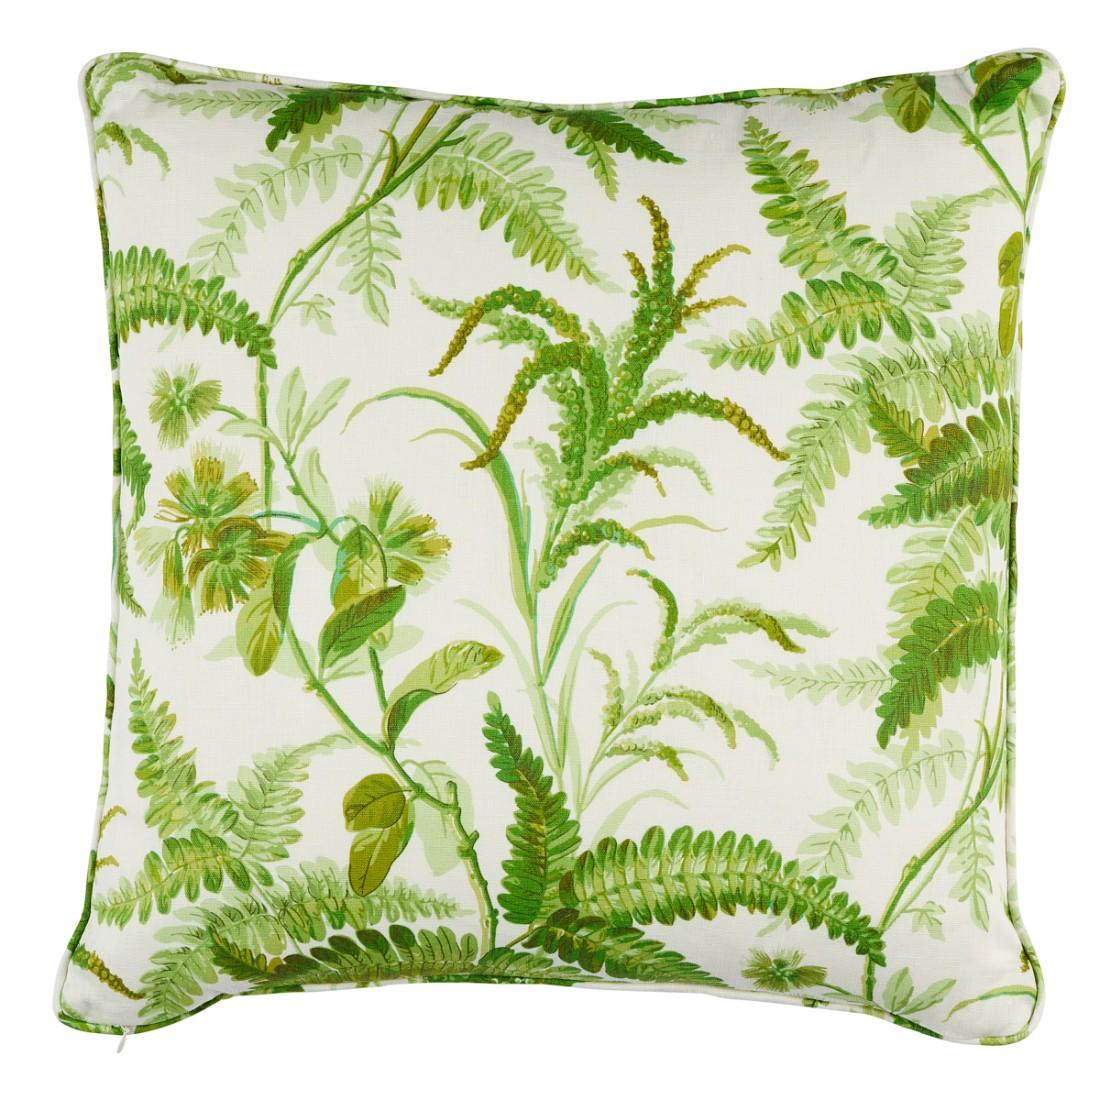 This pillow features Myers Fern Linen with a self welt finish. Gracious in its beauty, tropical-colored Myers Fern Linen is lushly printed on linen fabric with a lush forest of classic ferns and flowers that feels sophisticated, fresh, and timeless.